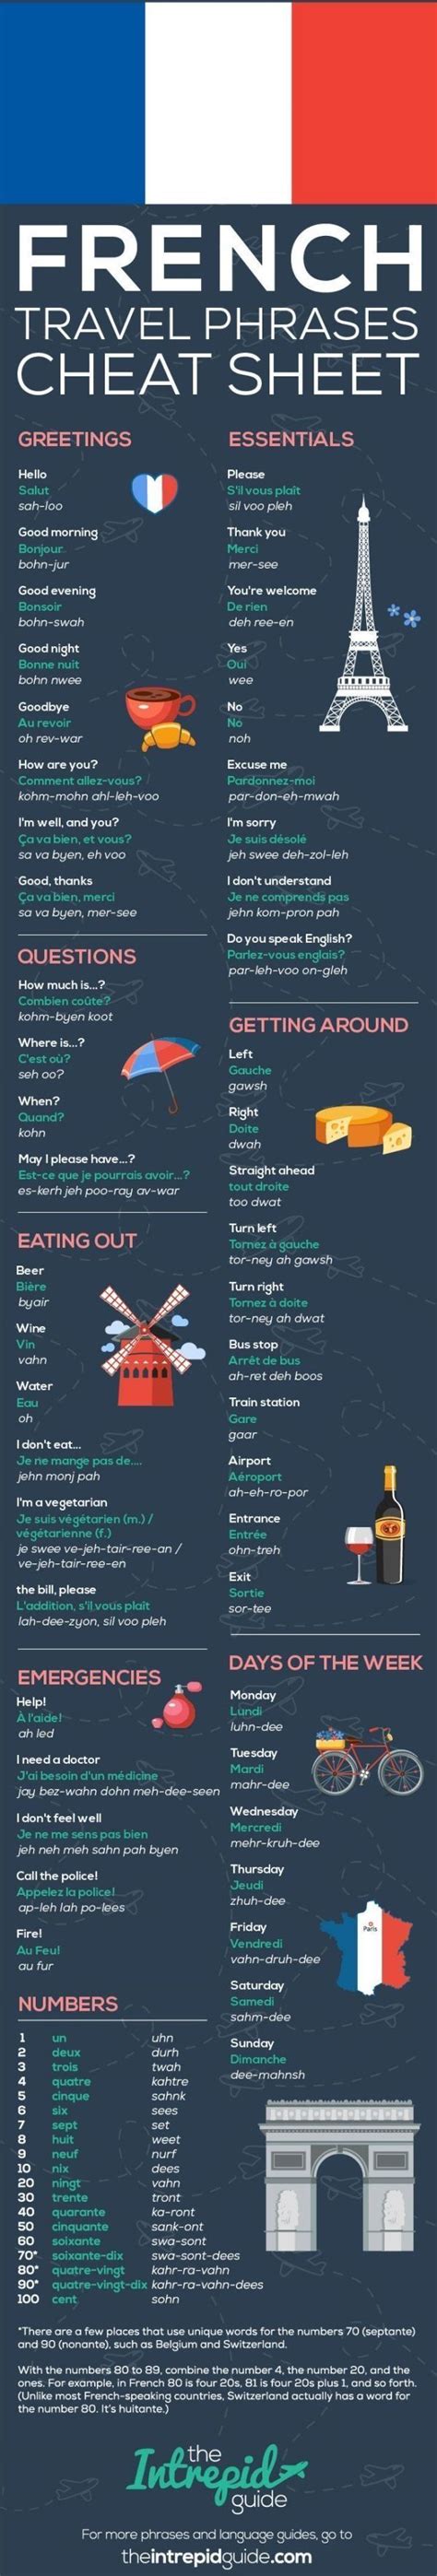 French Travel Phrases Cheat Sheet | #French #learnfrench #frenchtips ...